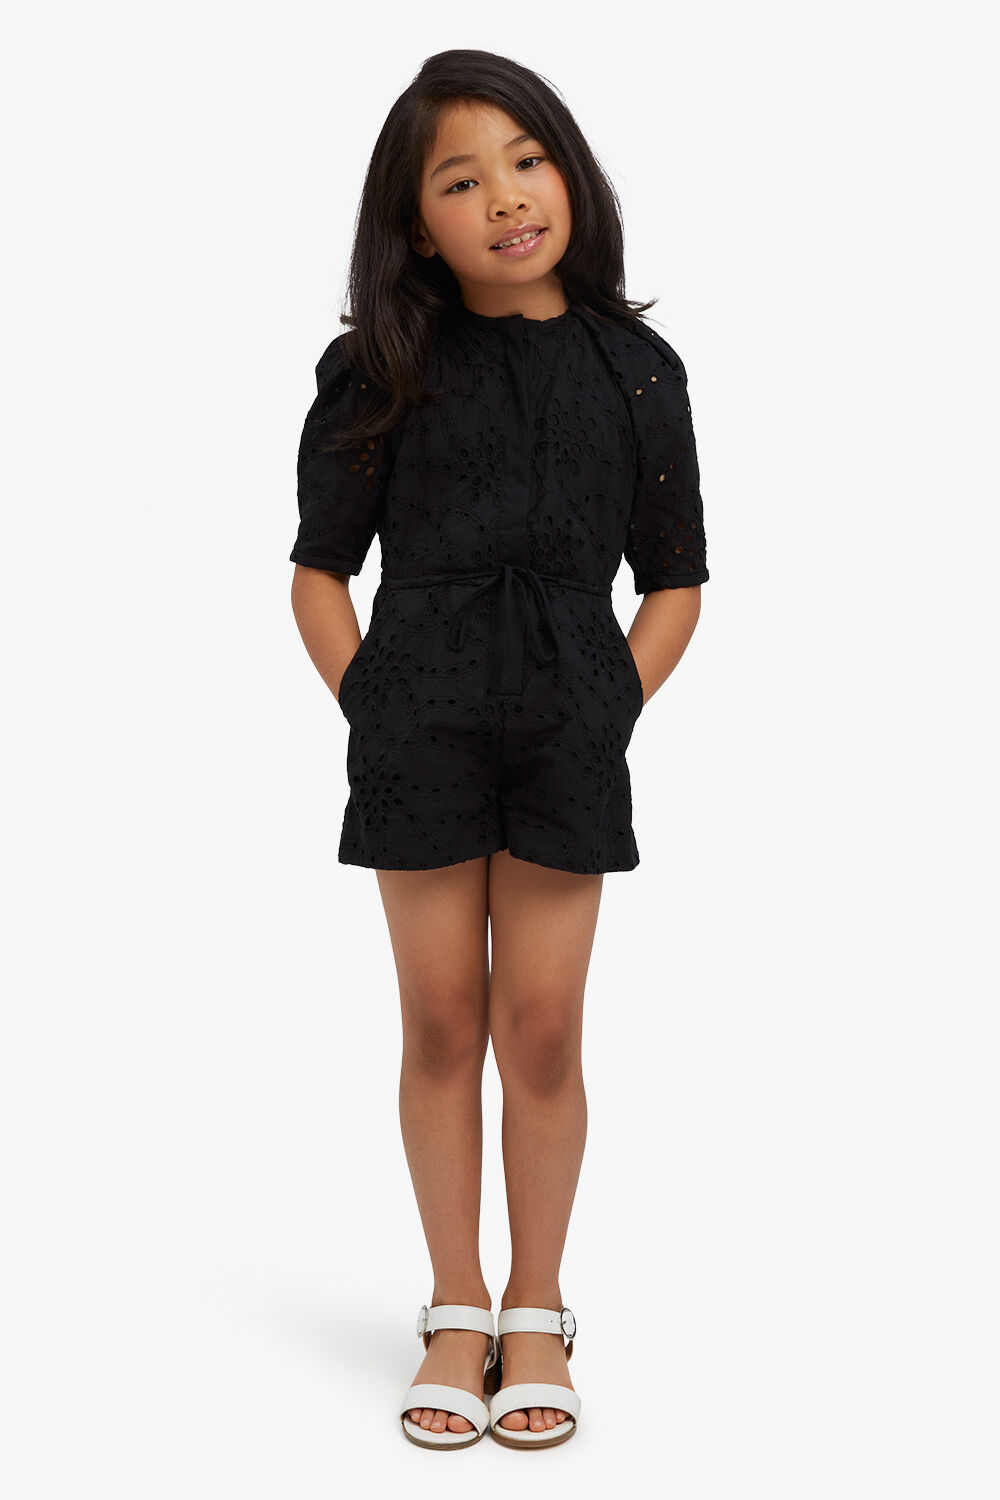 GIRLS THE PUFF PLAYSUIT  in colour CAVIAR